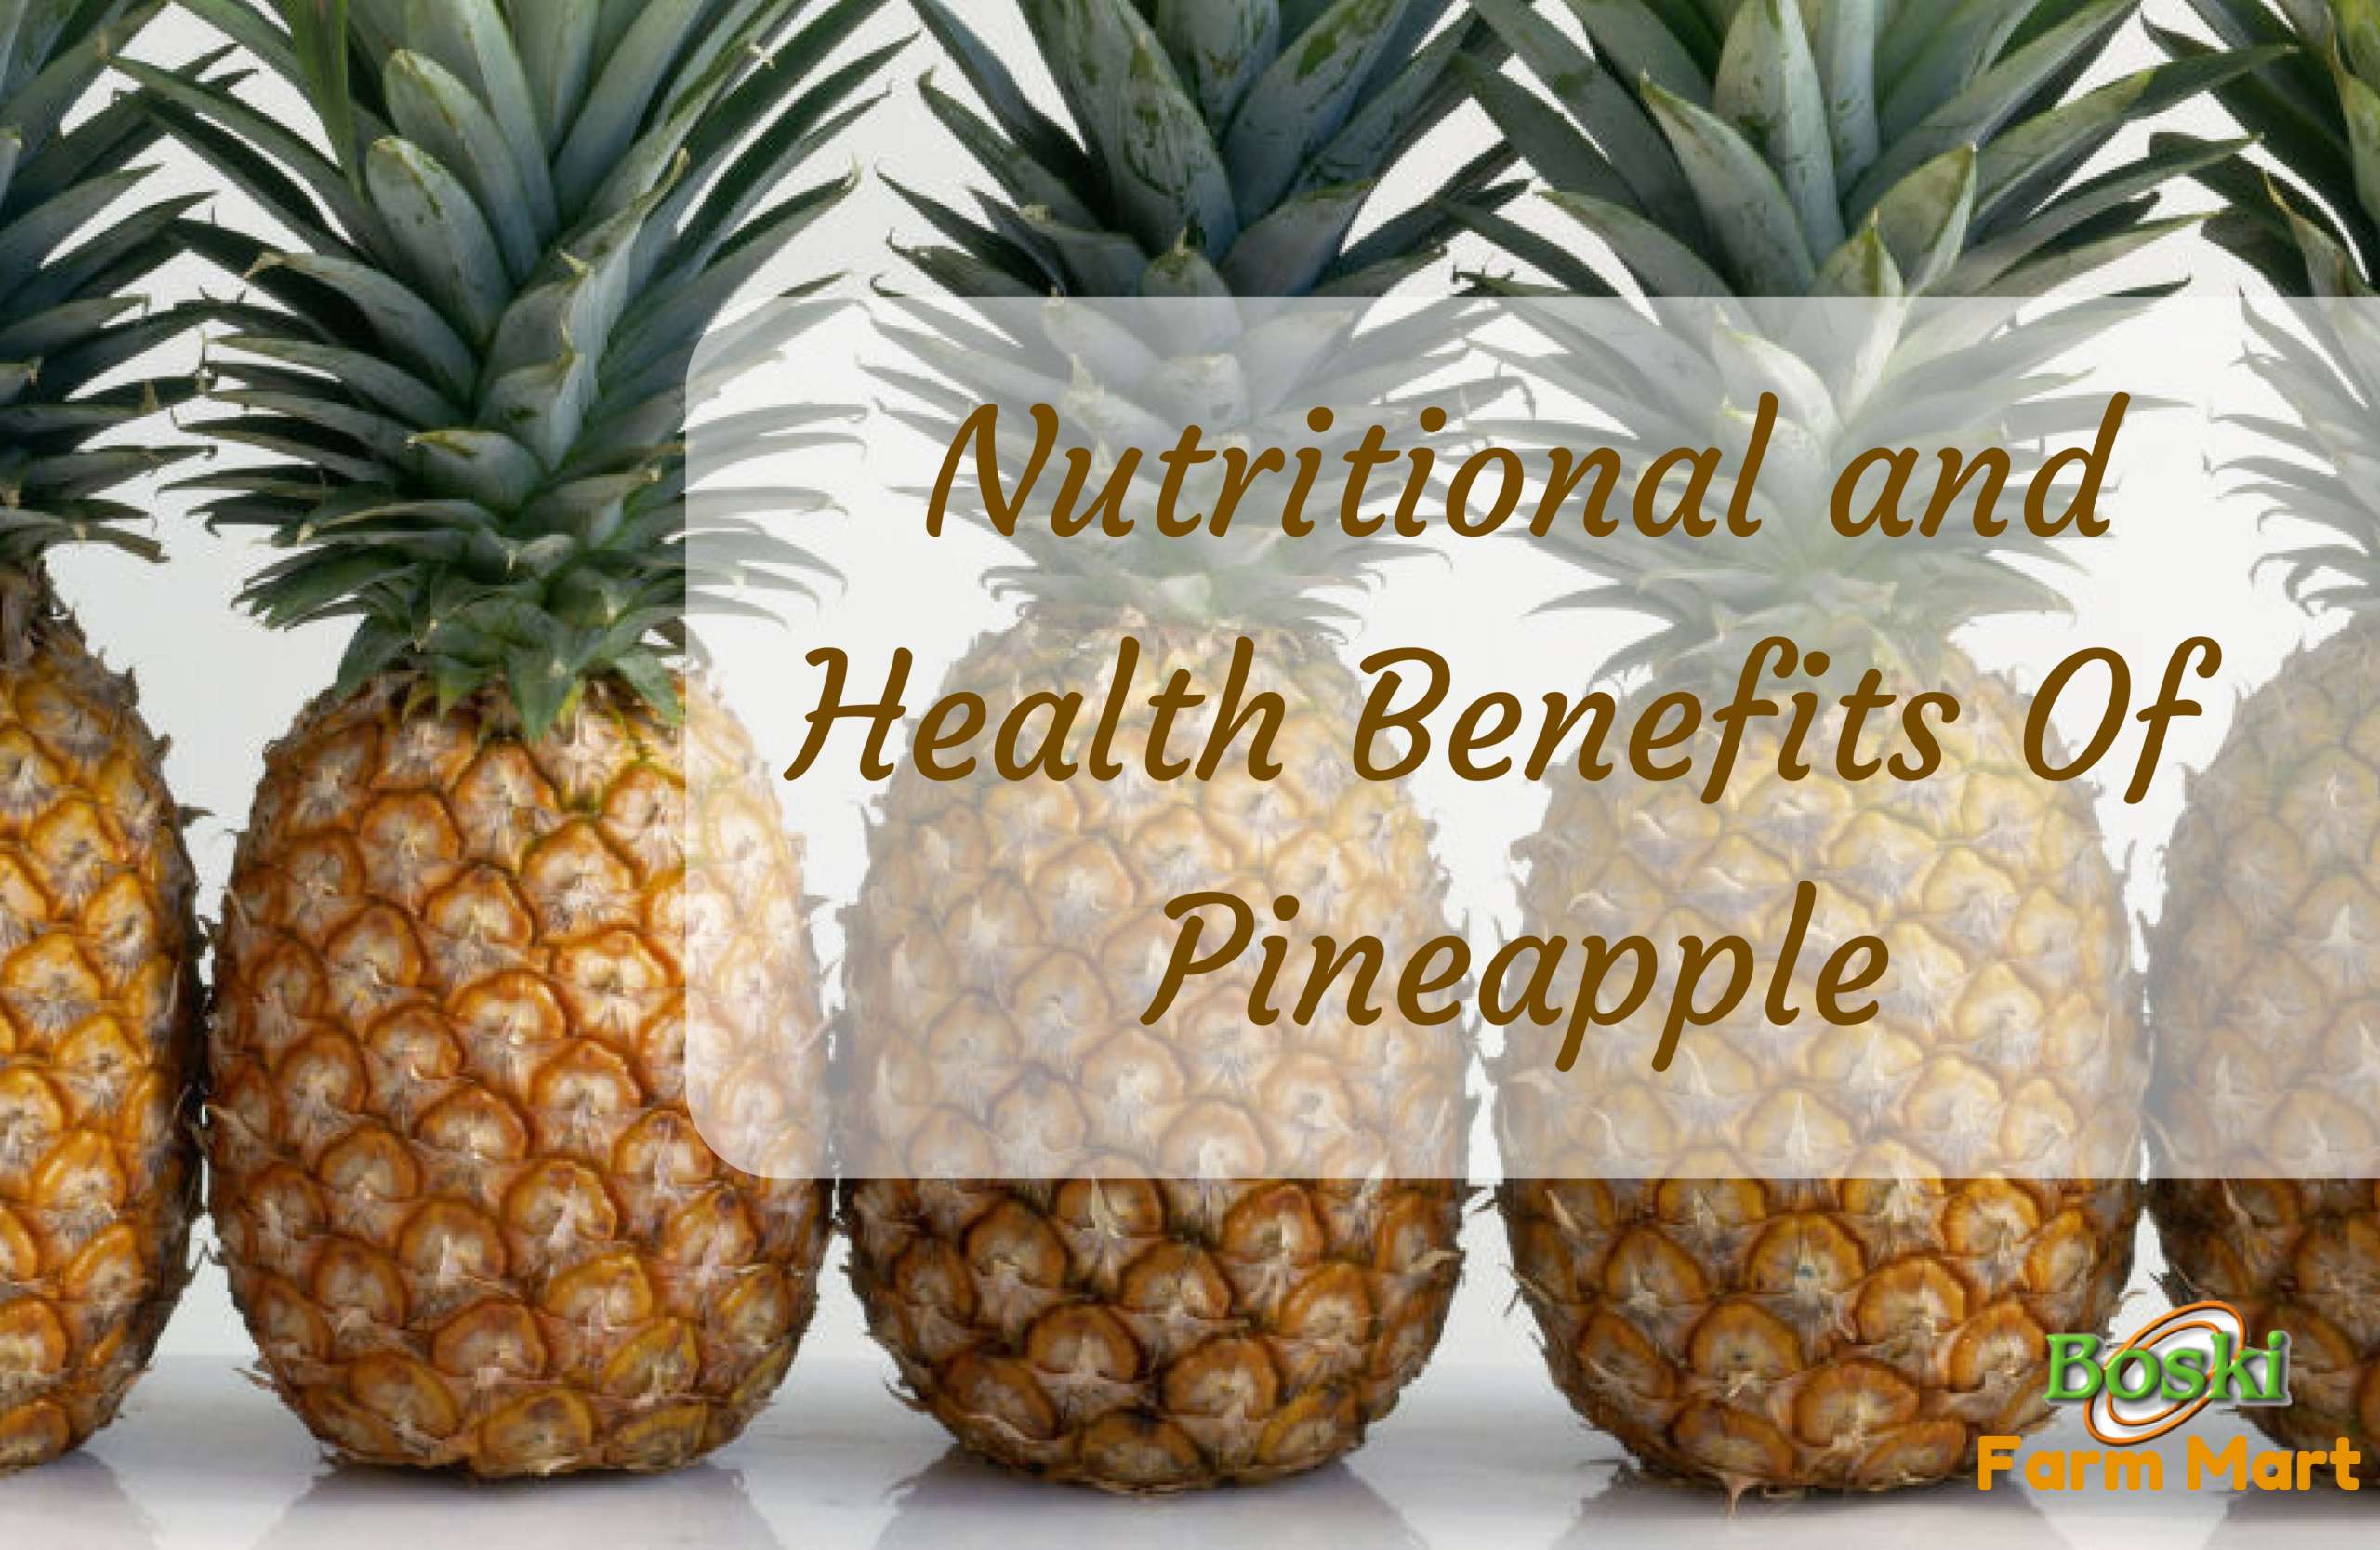 Nutritional and health benefit of pineapple